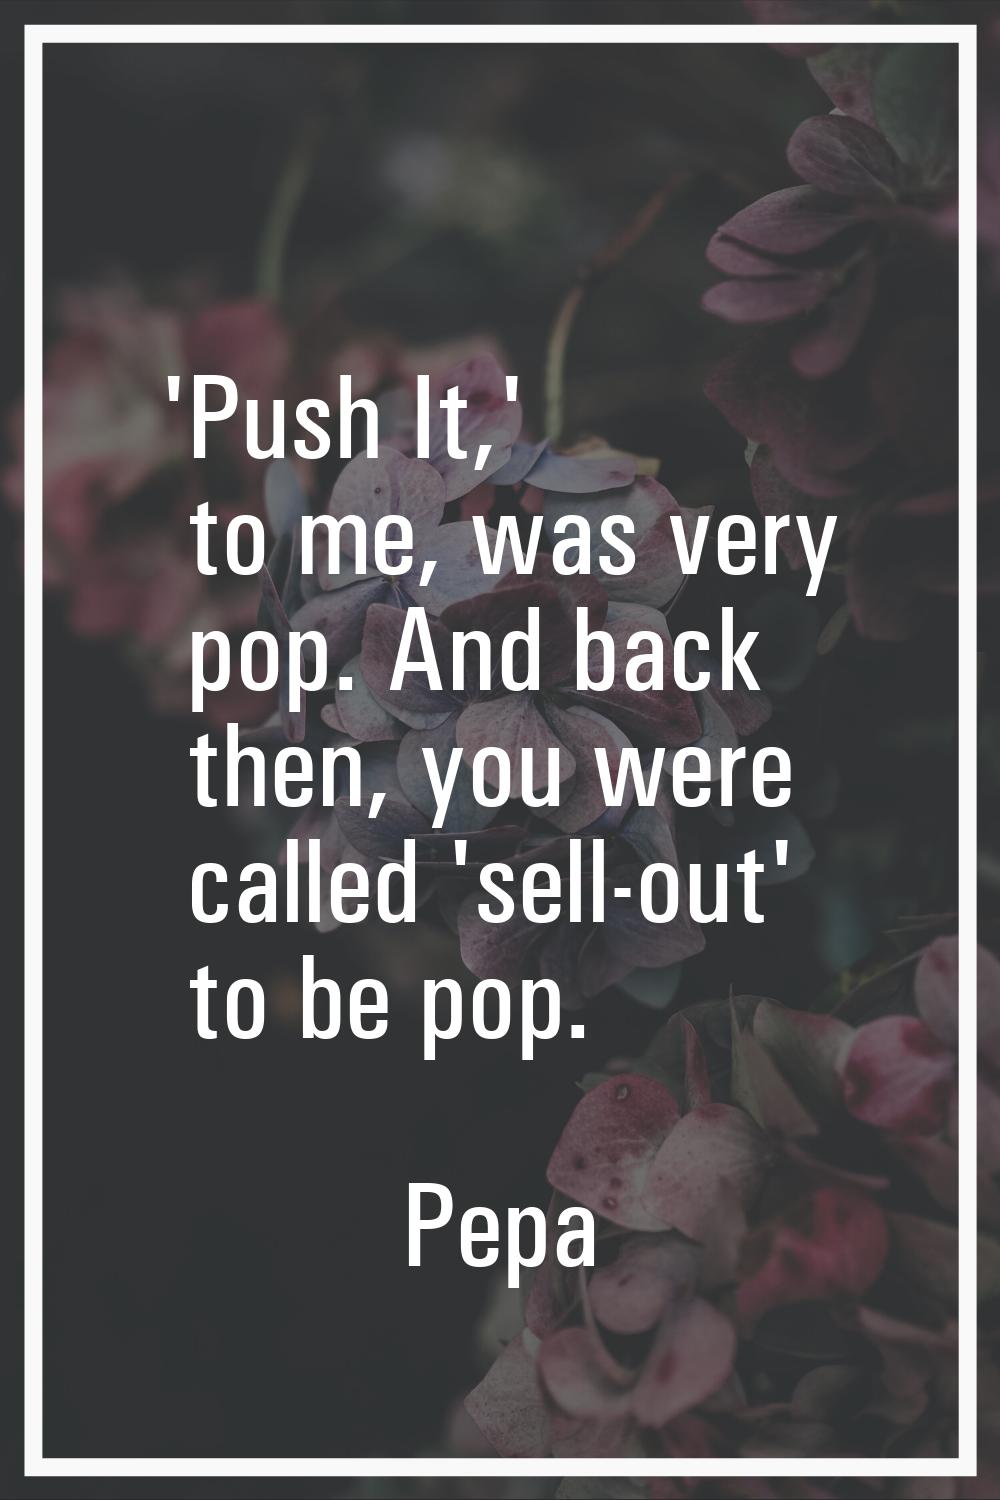 'Push It,' to me, was very pop. And back then, you were called 'sell-out' to be pop.